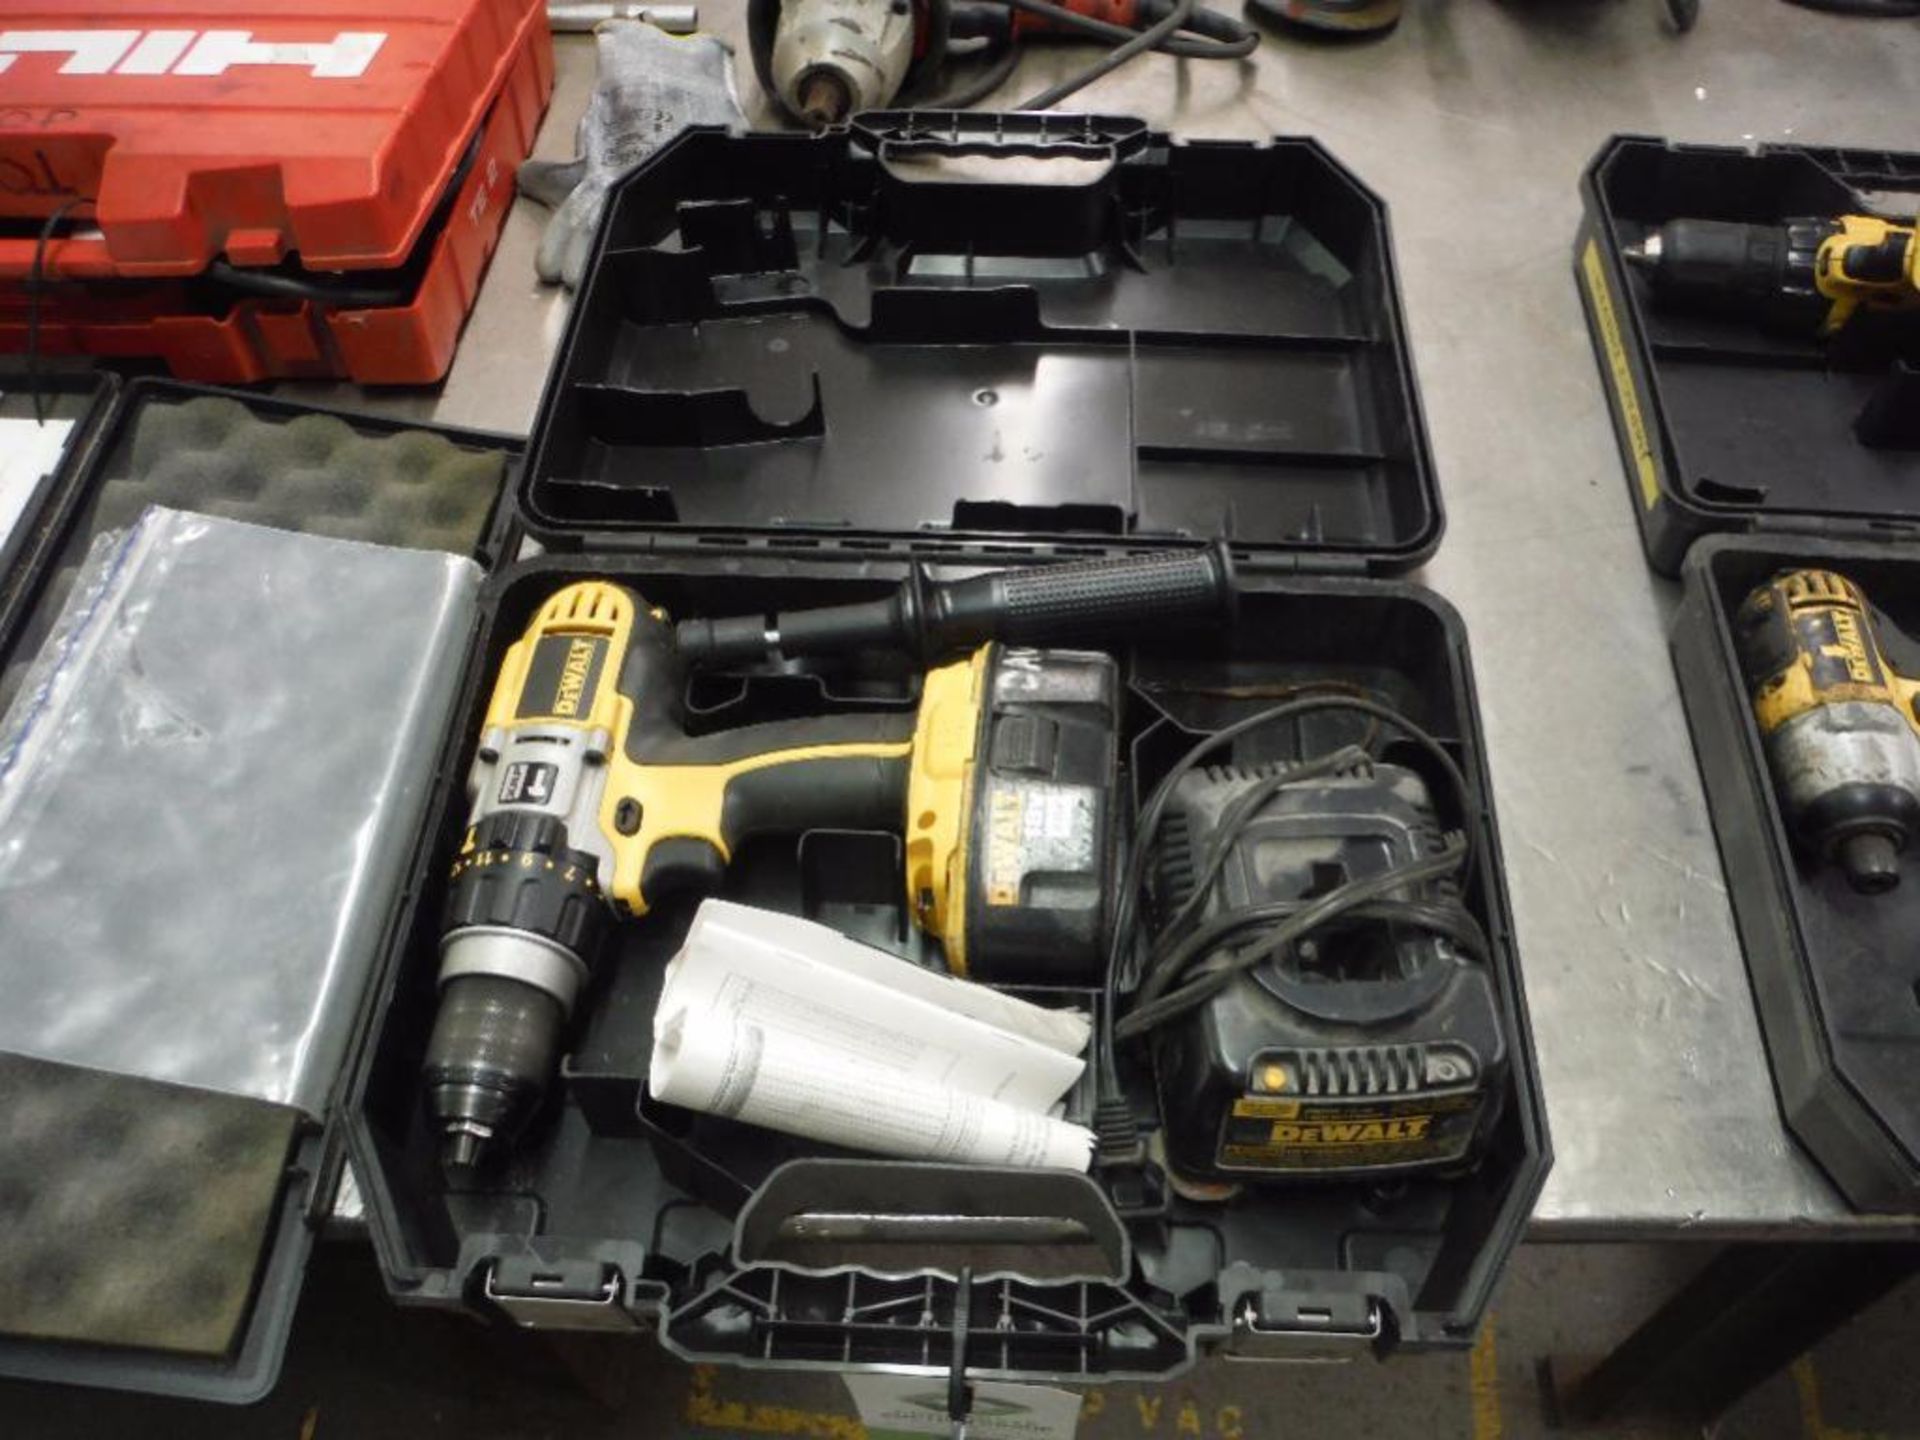 Dewalt 18 volt xrp cordless drill, battery, battery charger, case ** Rigging Fee: $5 **